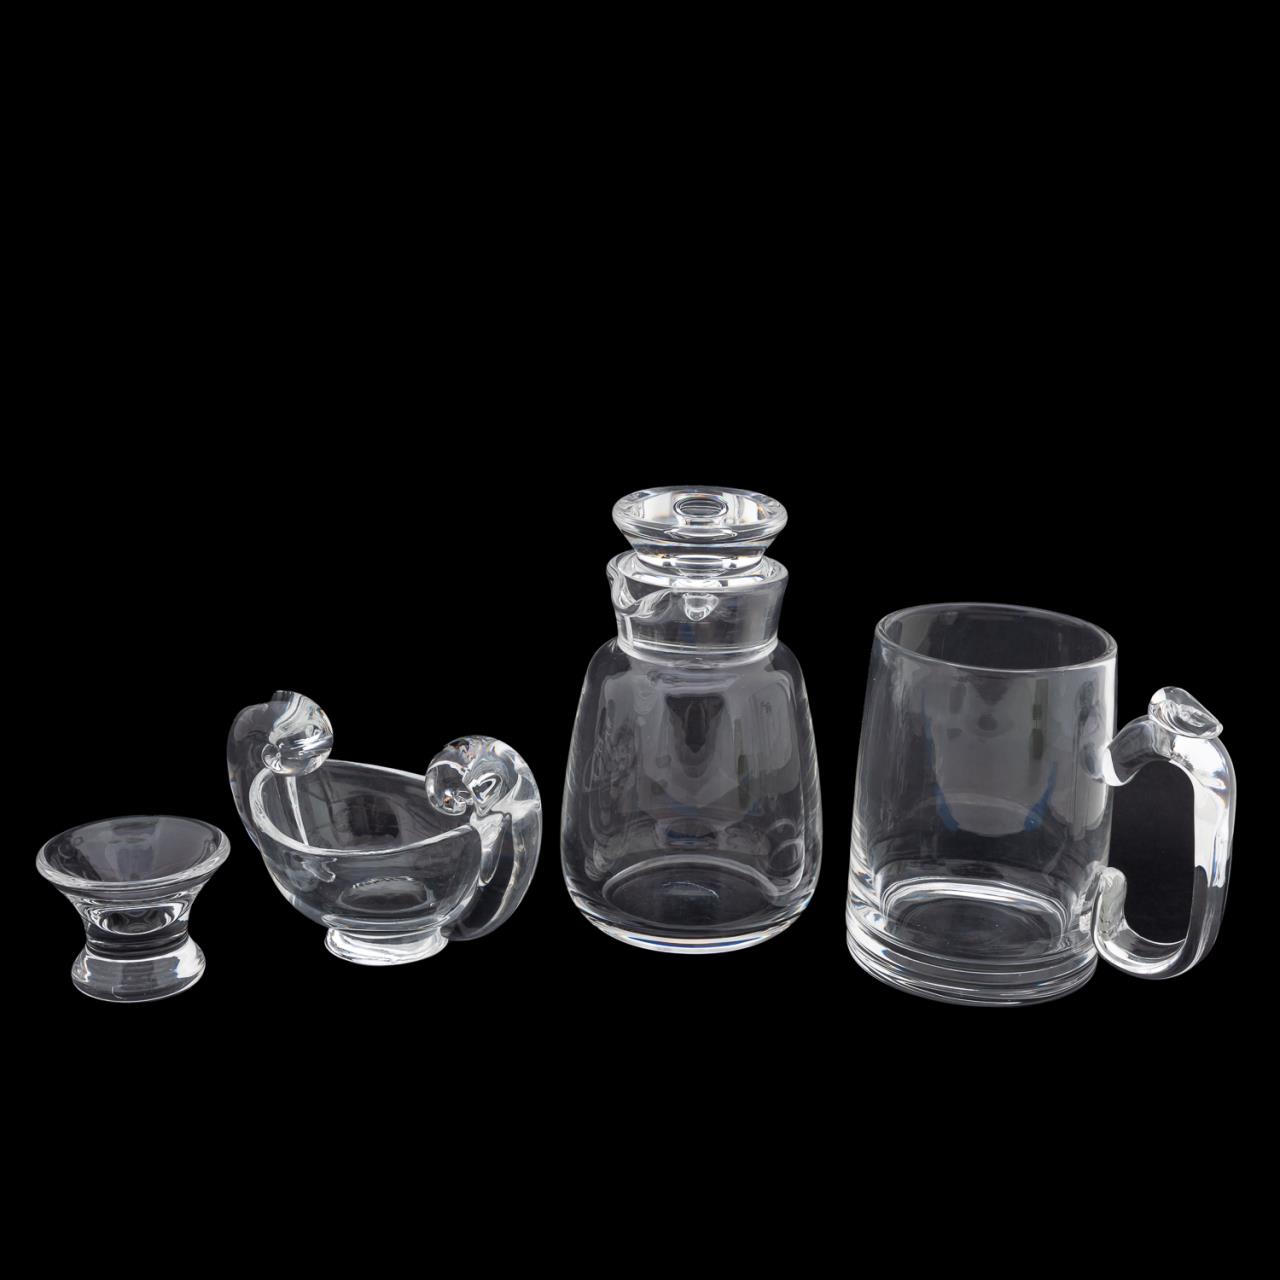 4 PC STEUBEN COLORLESS GLASS TABLETOP 359f85